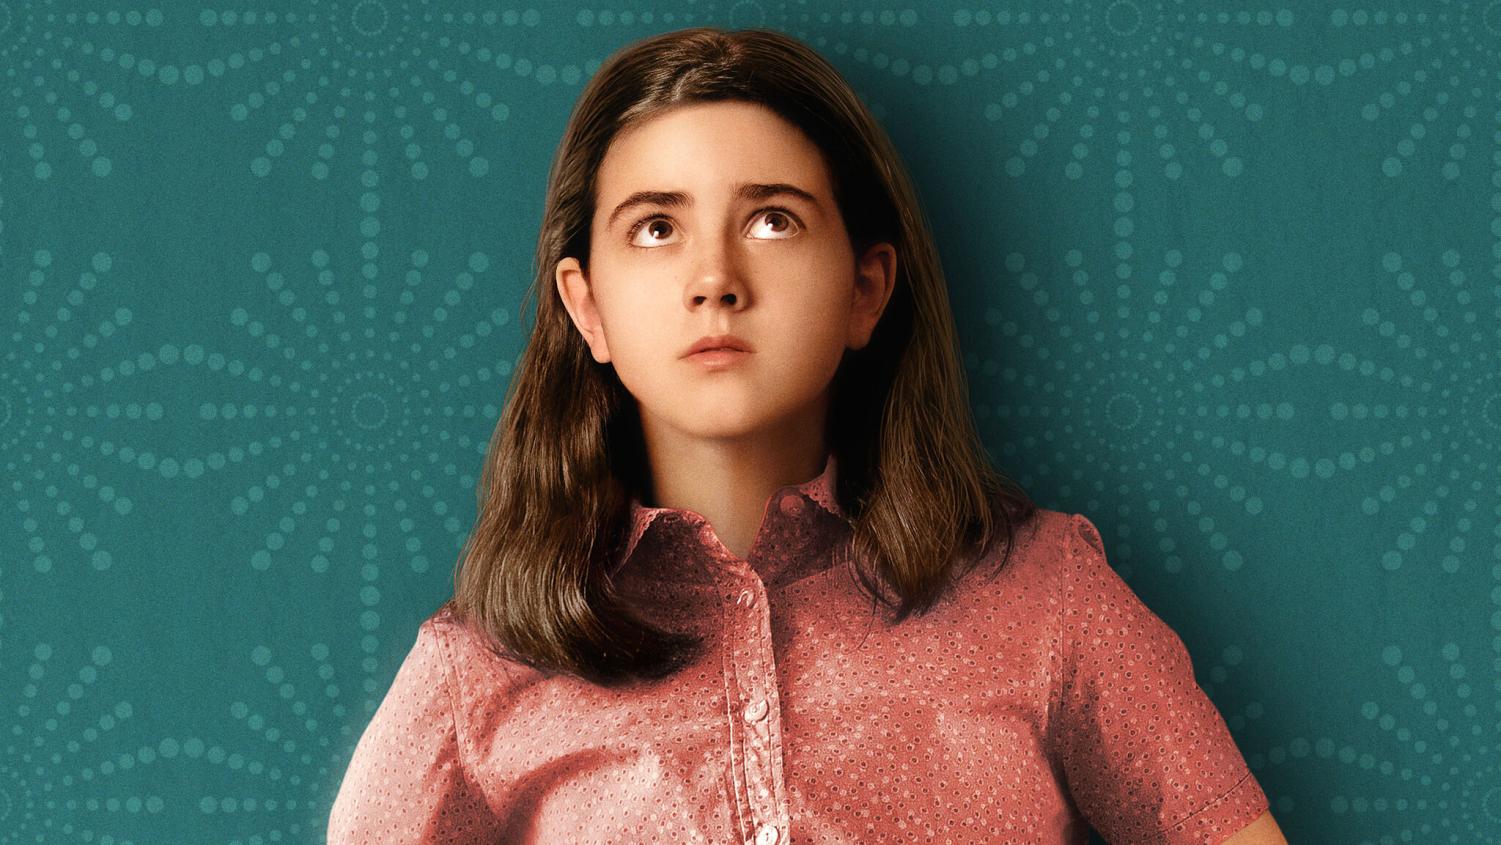 An Ode to Barbara from “Stranger Things”